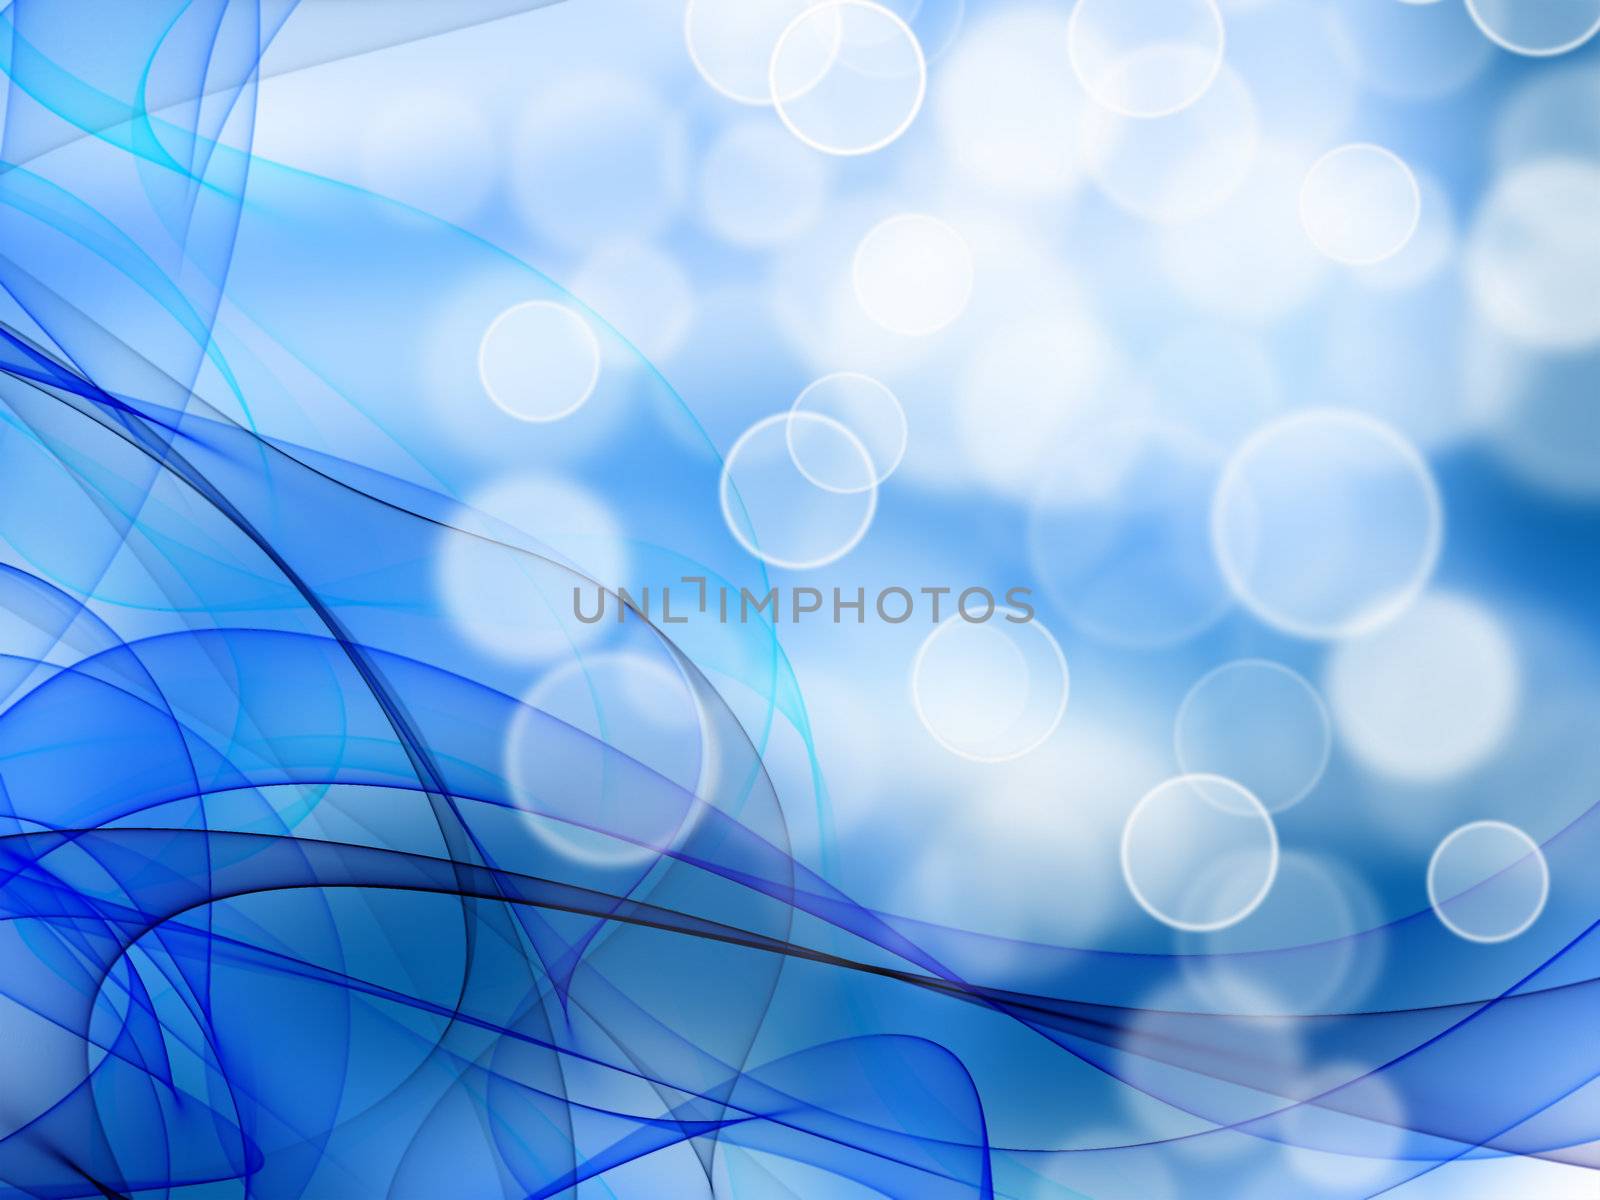 Smooth waves from tones of blue on a white background by Serp